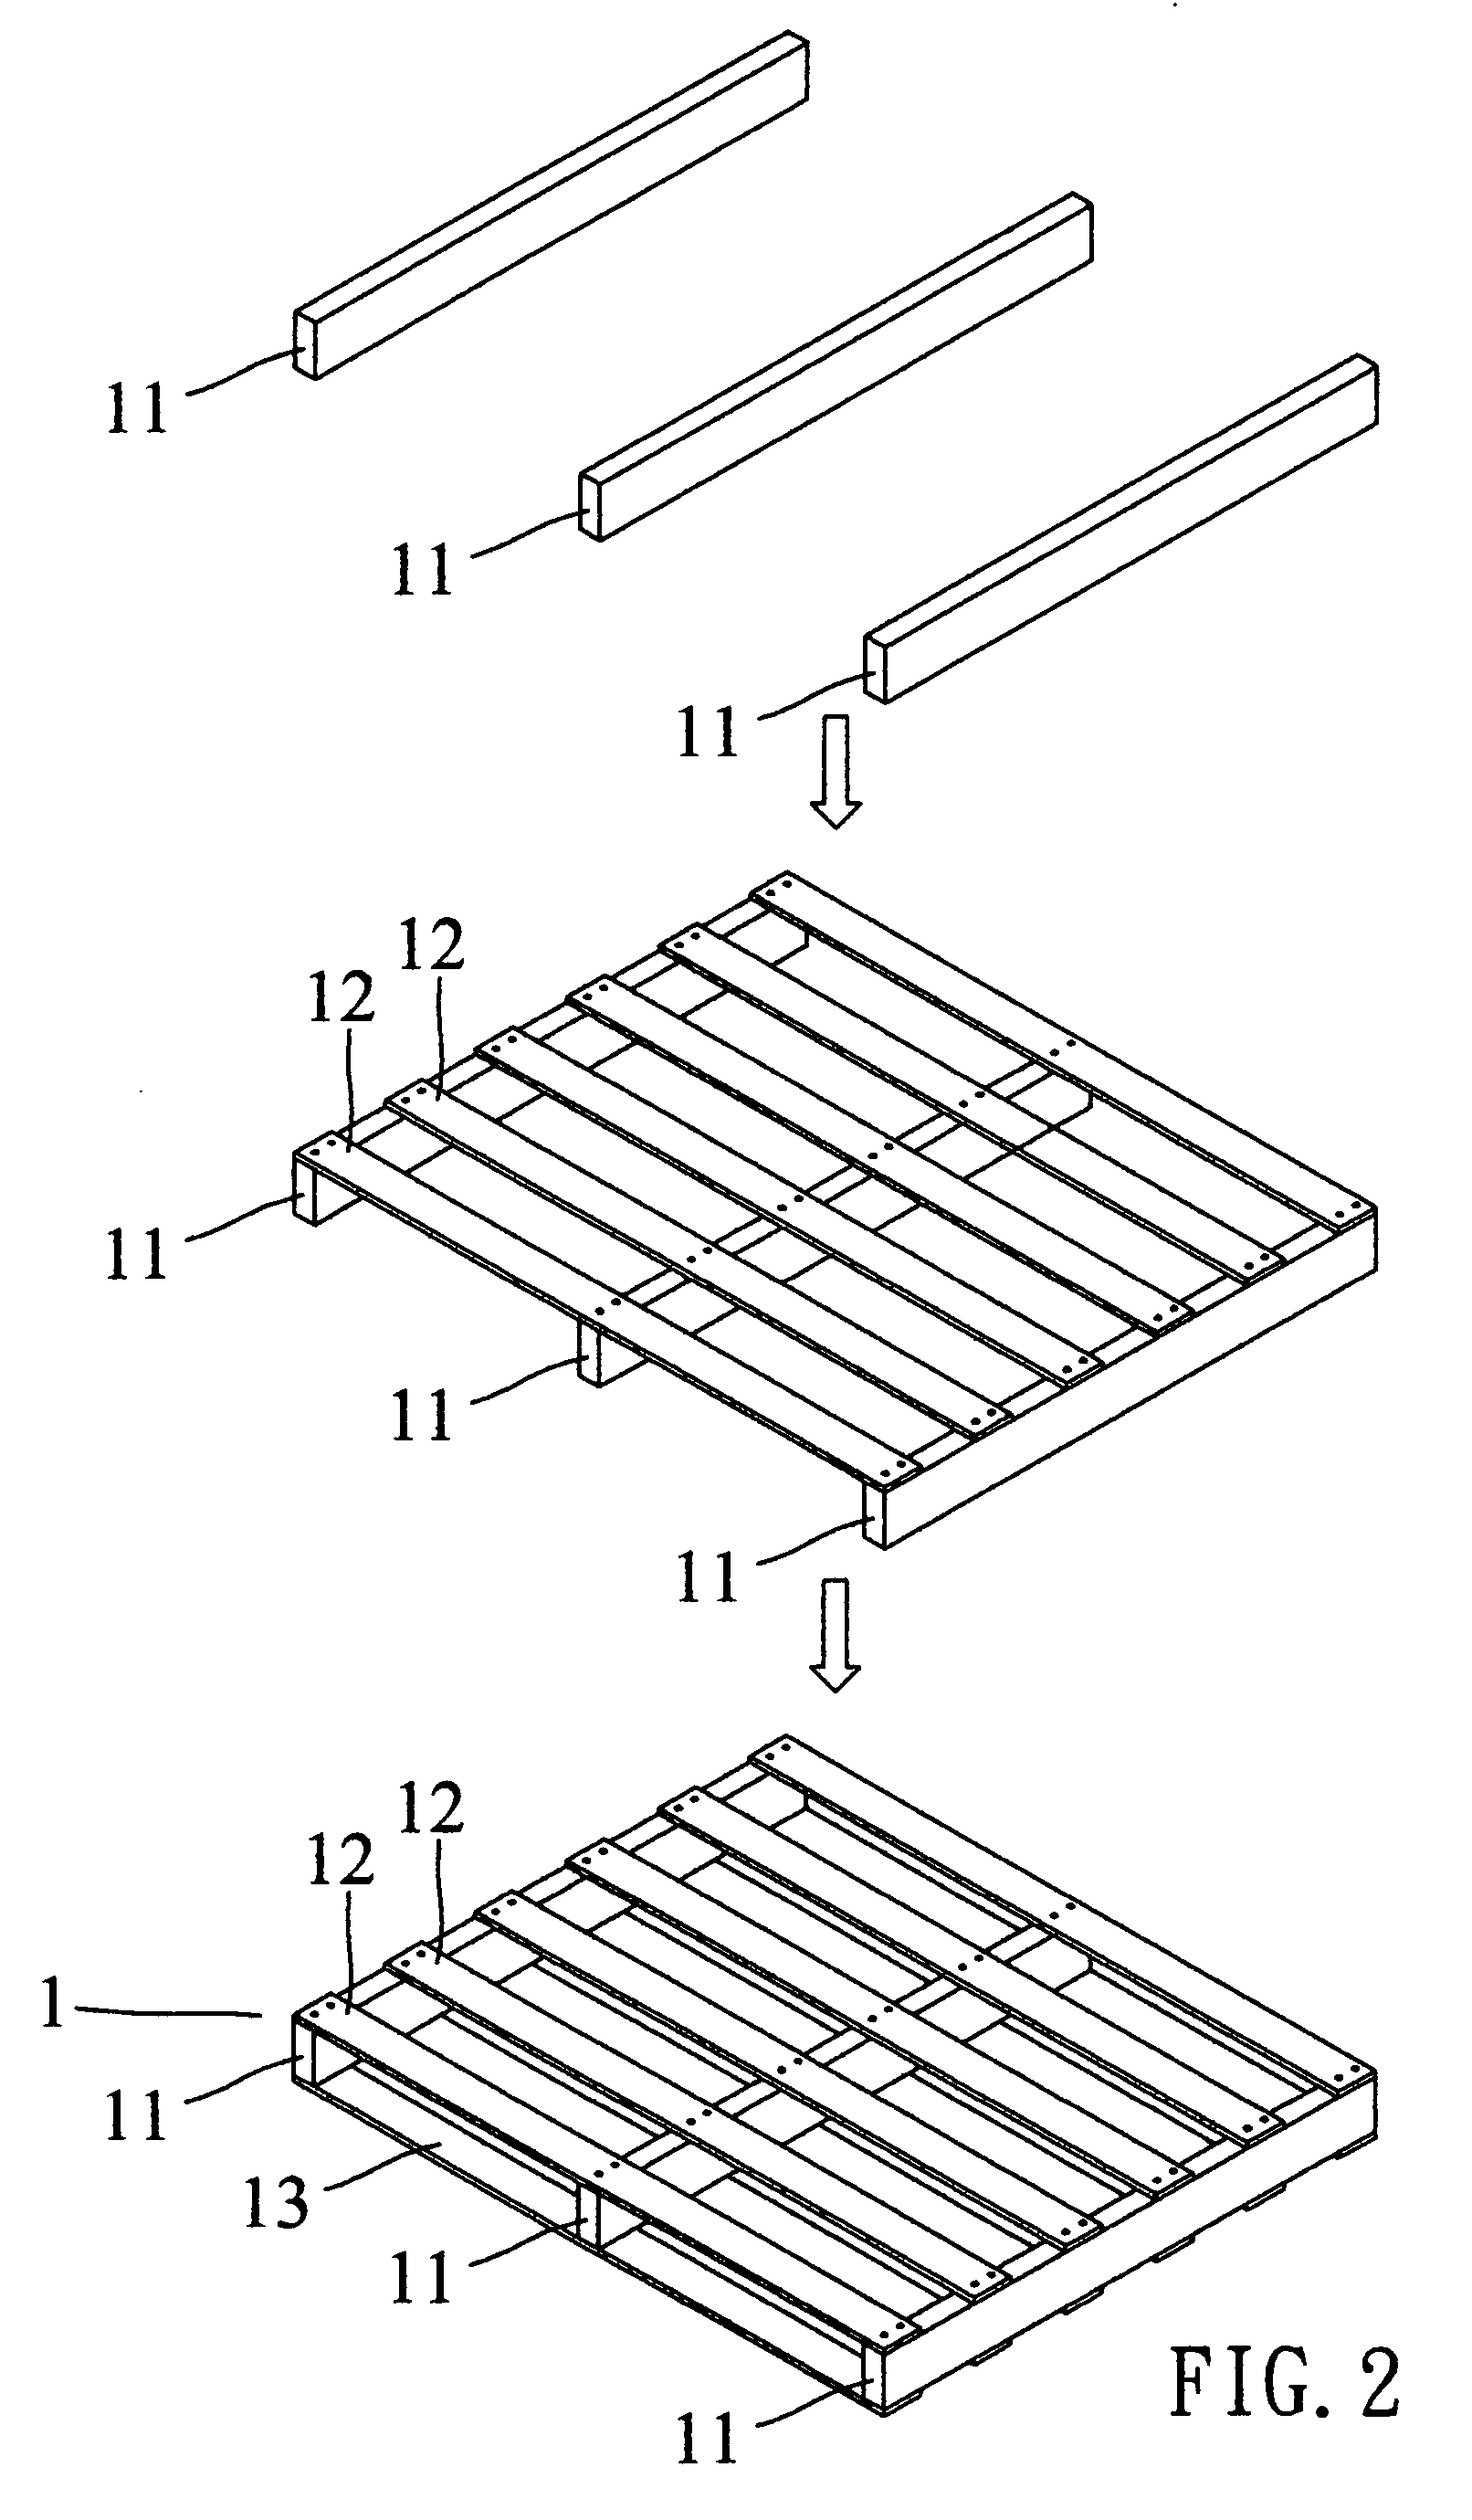 Nailing mechanism for a packing plates